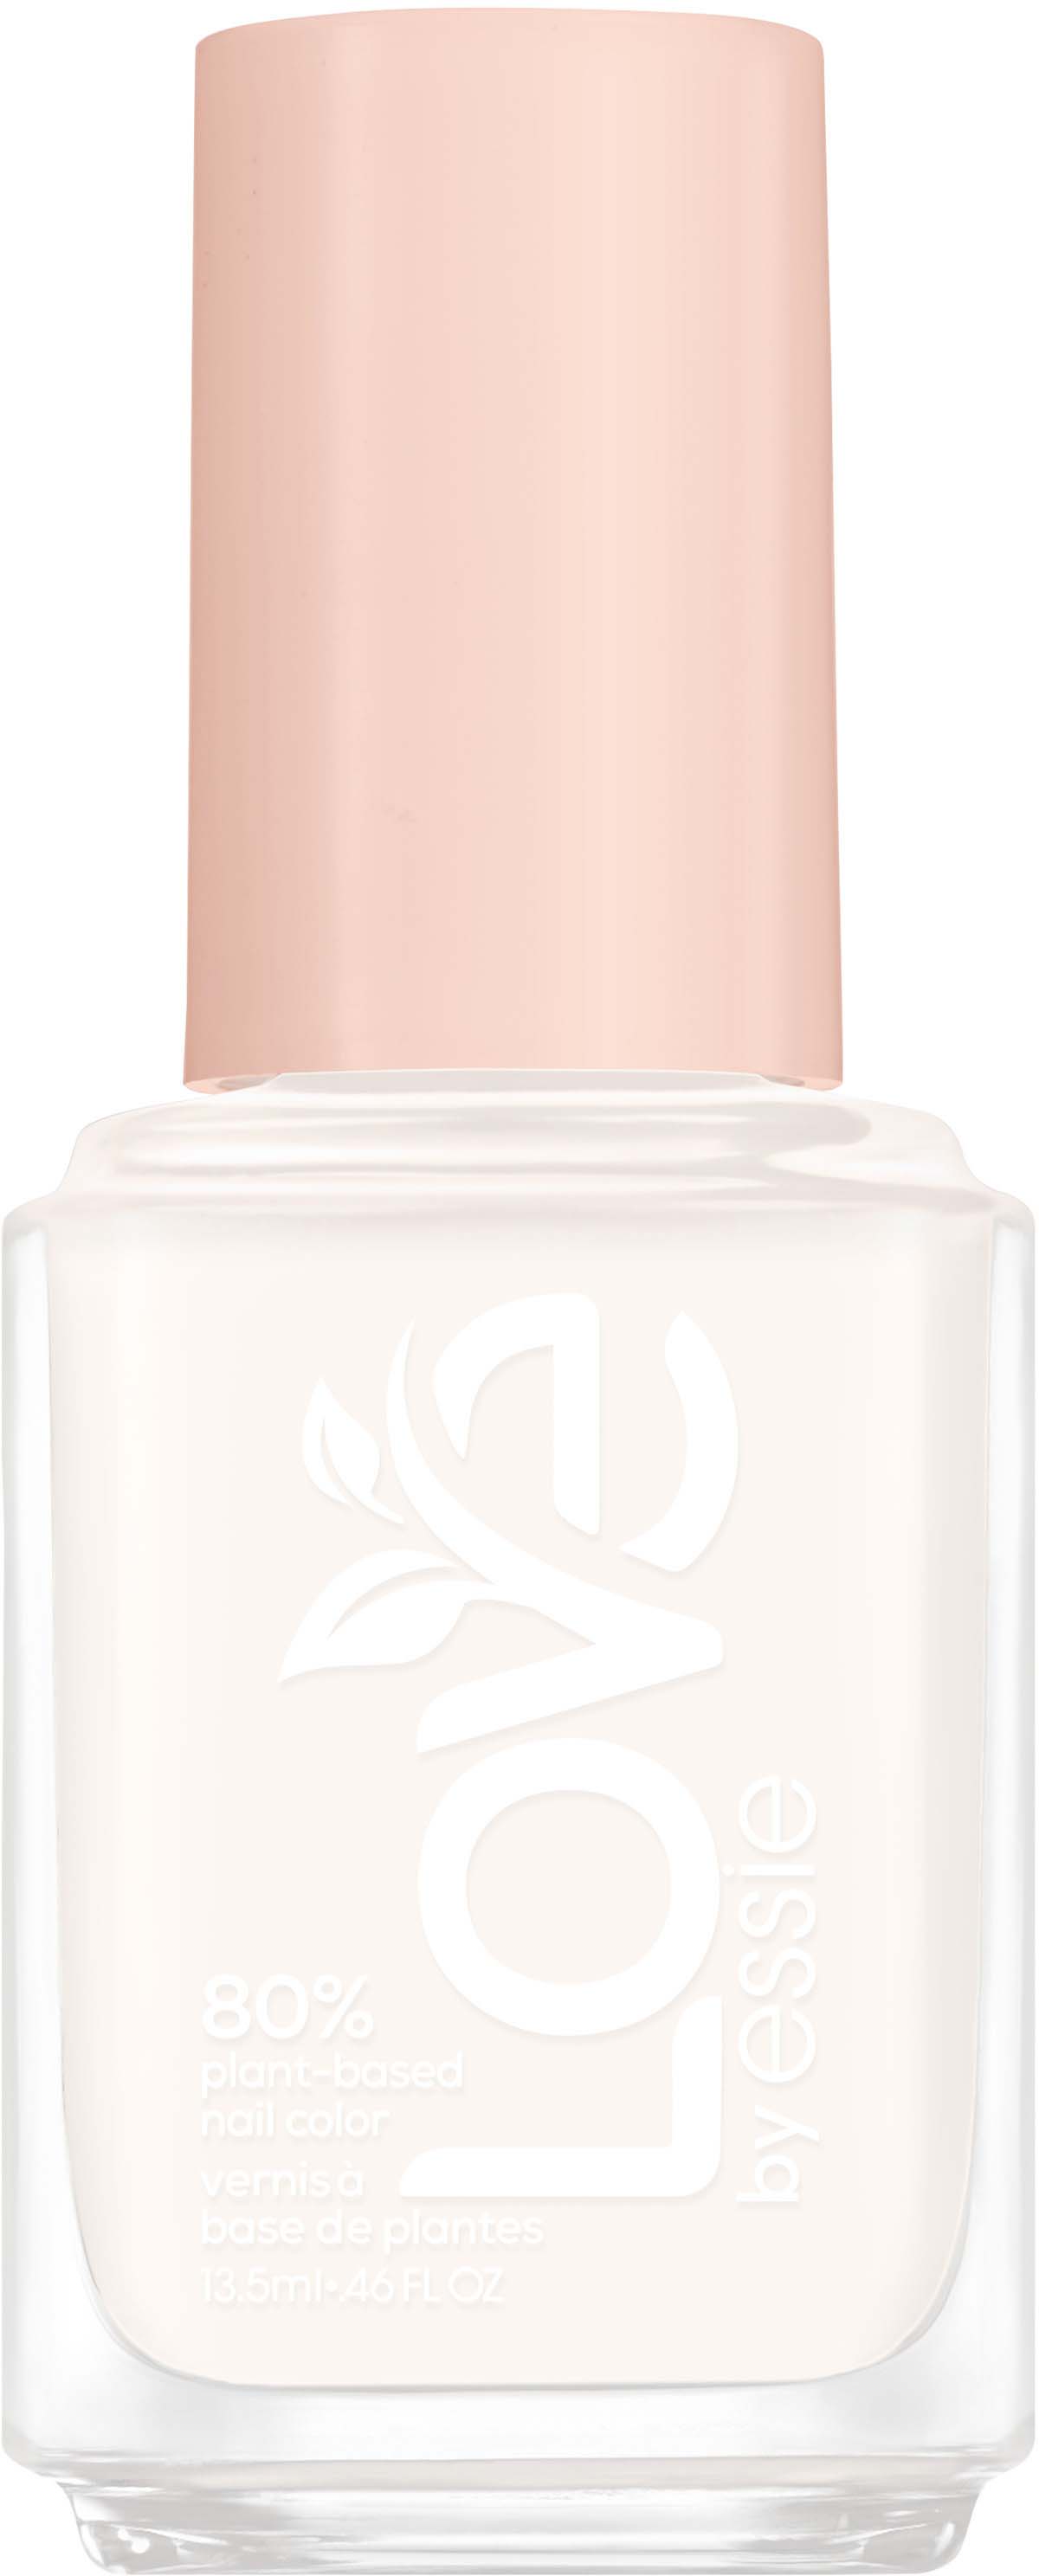 Essie LOVE by 120 Essie Am Nail Plant-based Color Moment I The 80